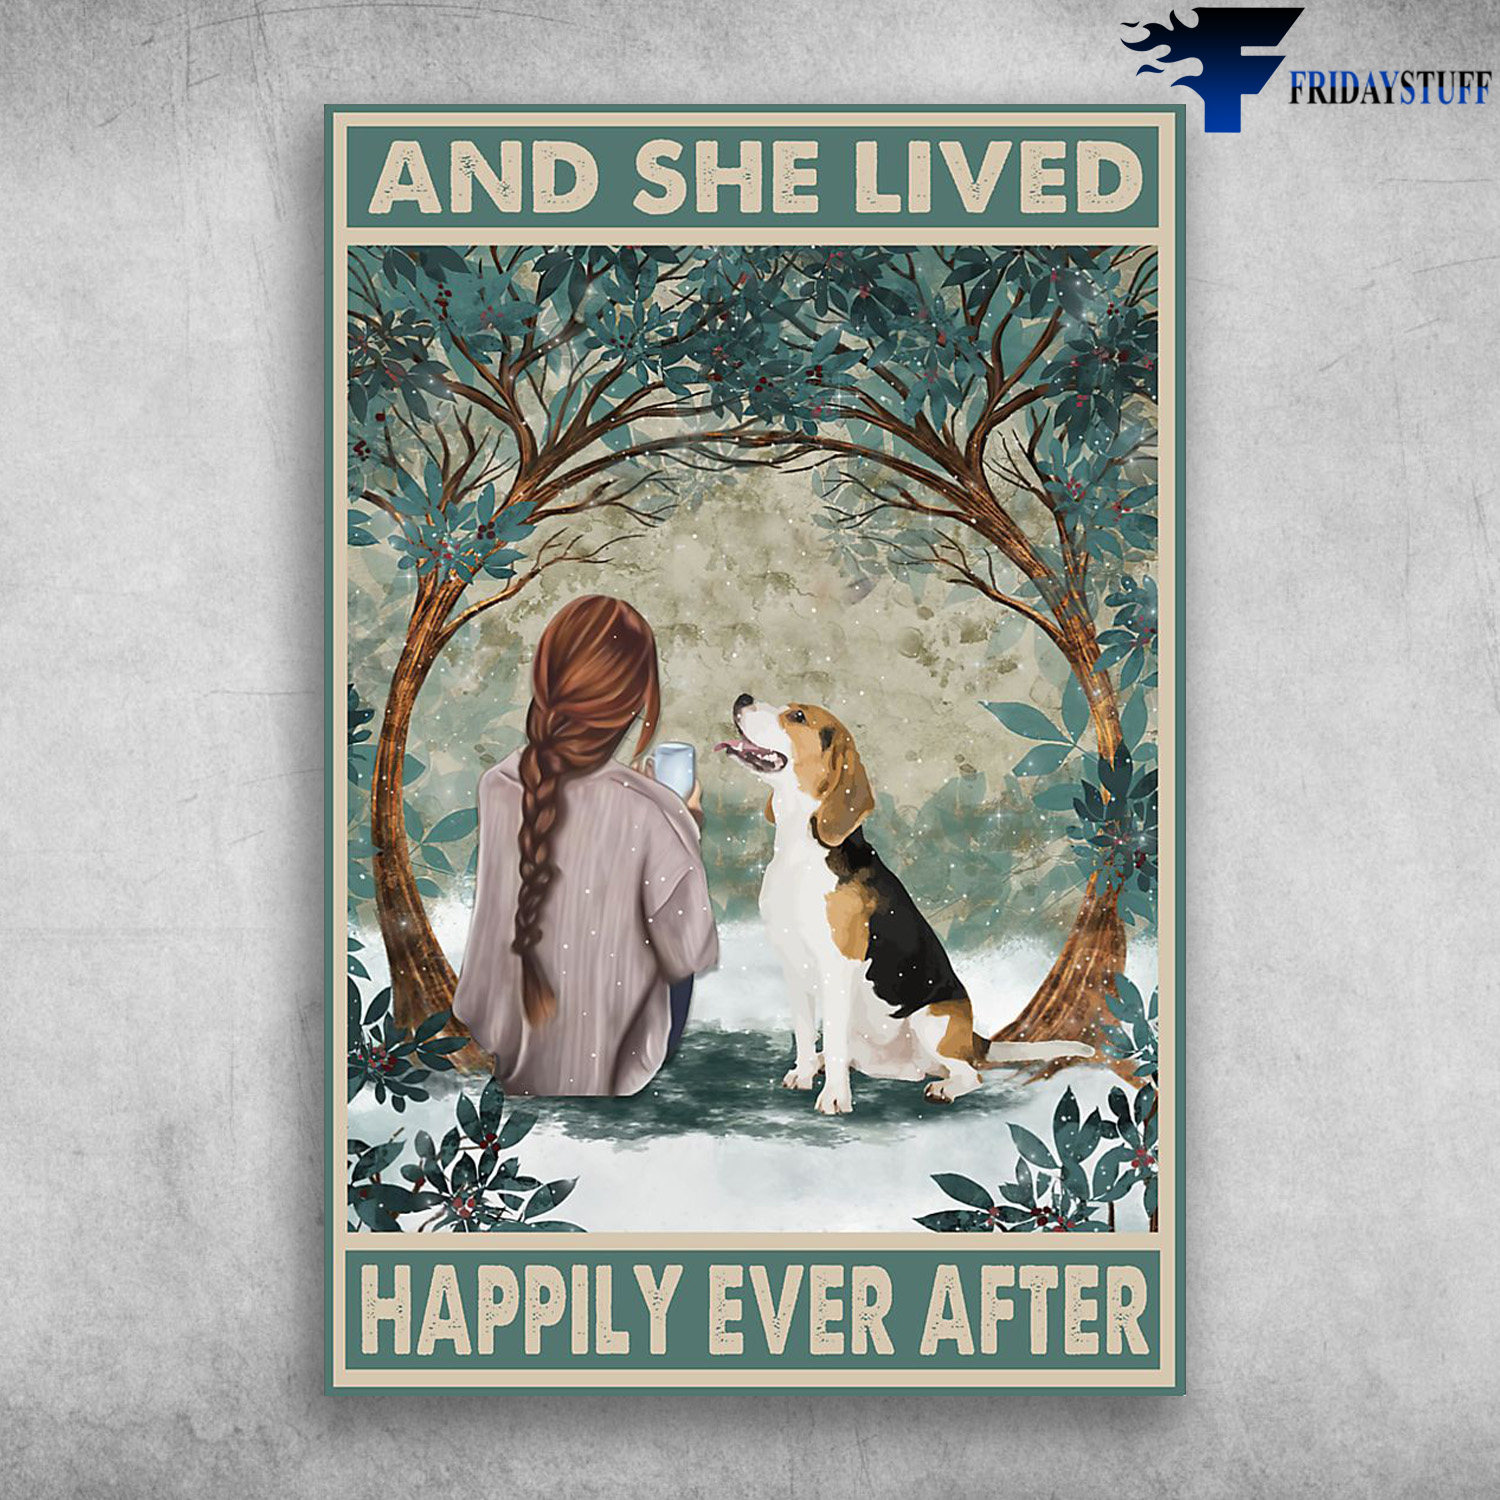 Girl And Beagle Dog - And She Live, Happily Ever After